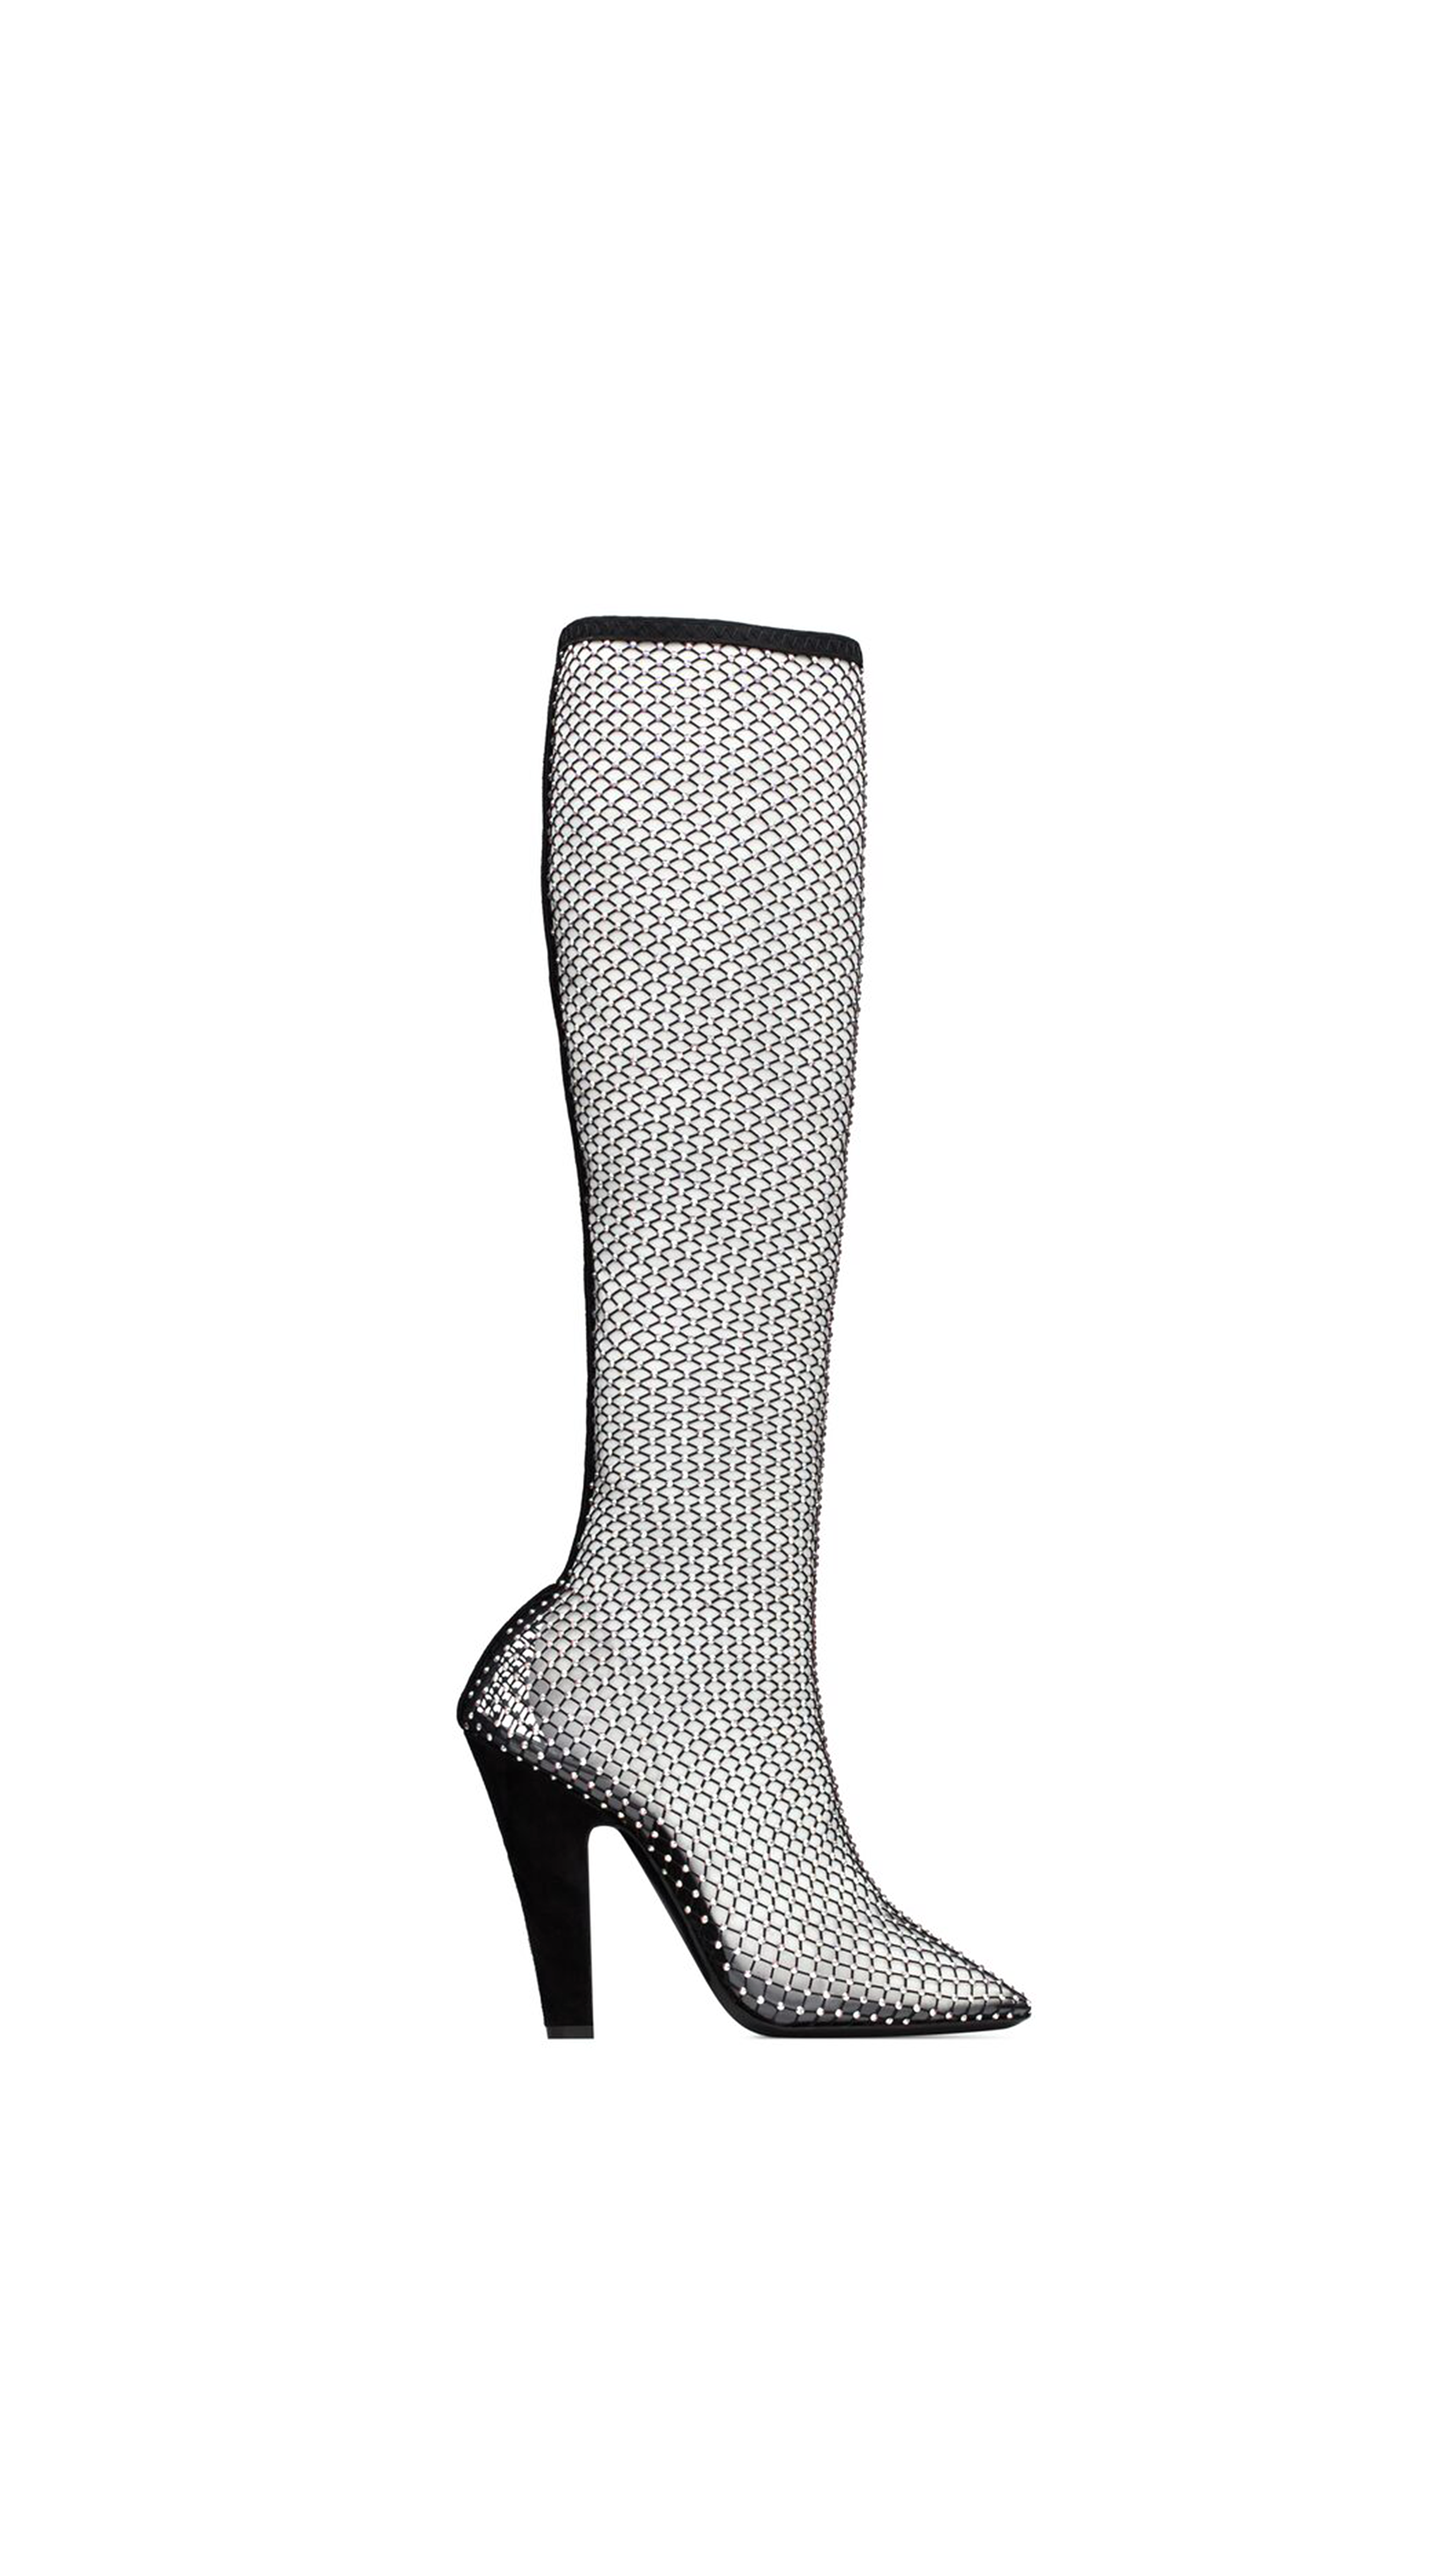 68 Boots In Mesh With Rhinestones - Black